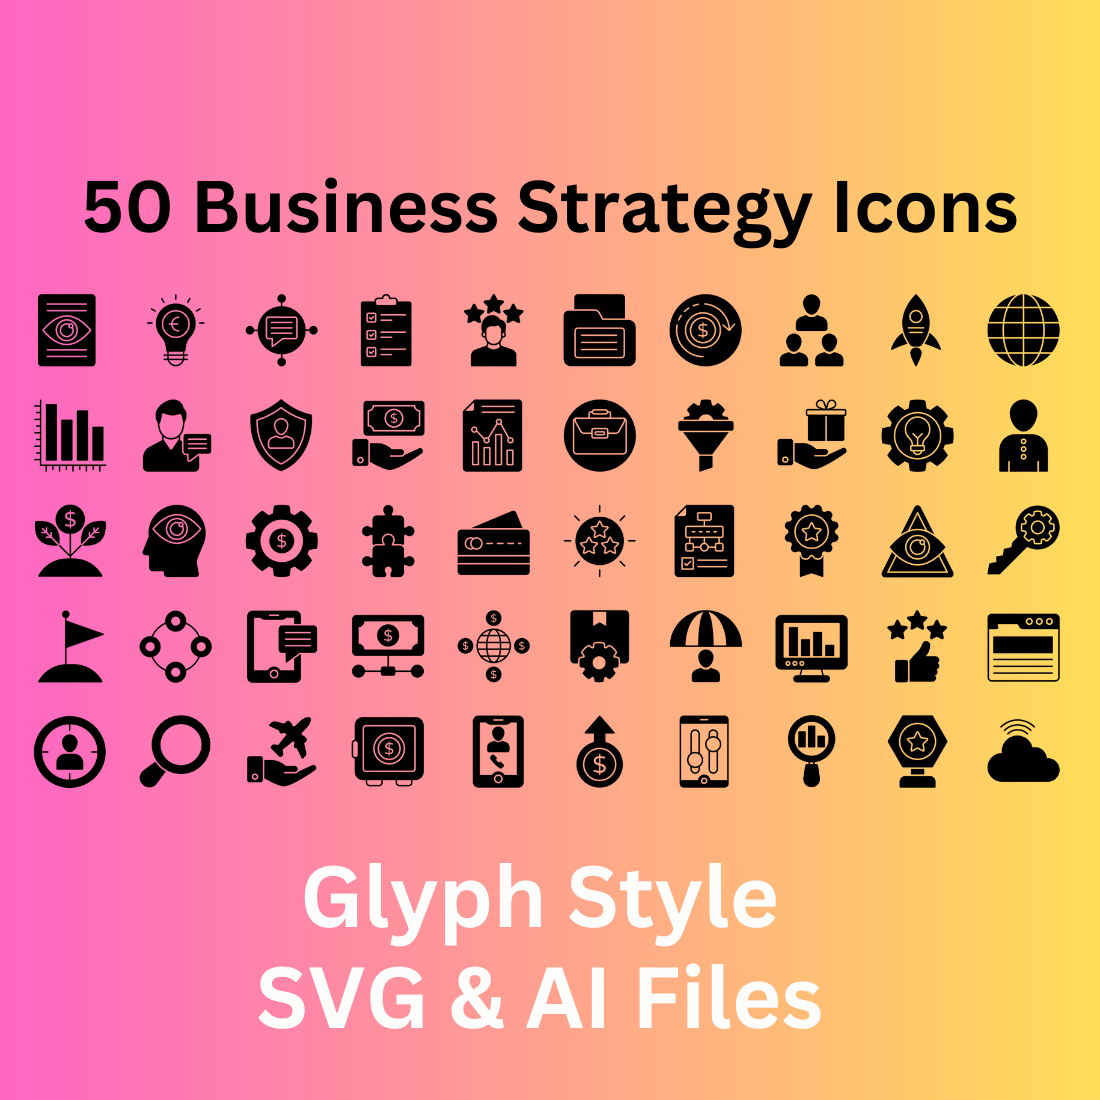 Business Strategy Icon Set 50 Glyph Icons - SVG And AI Files cover image.